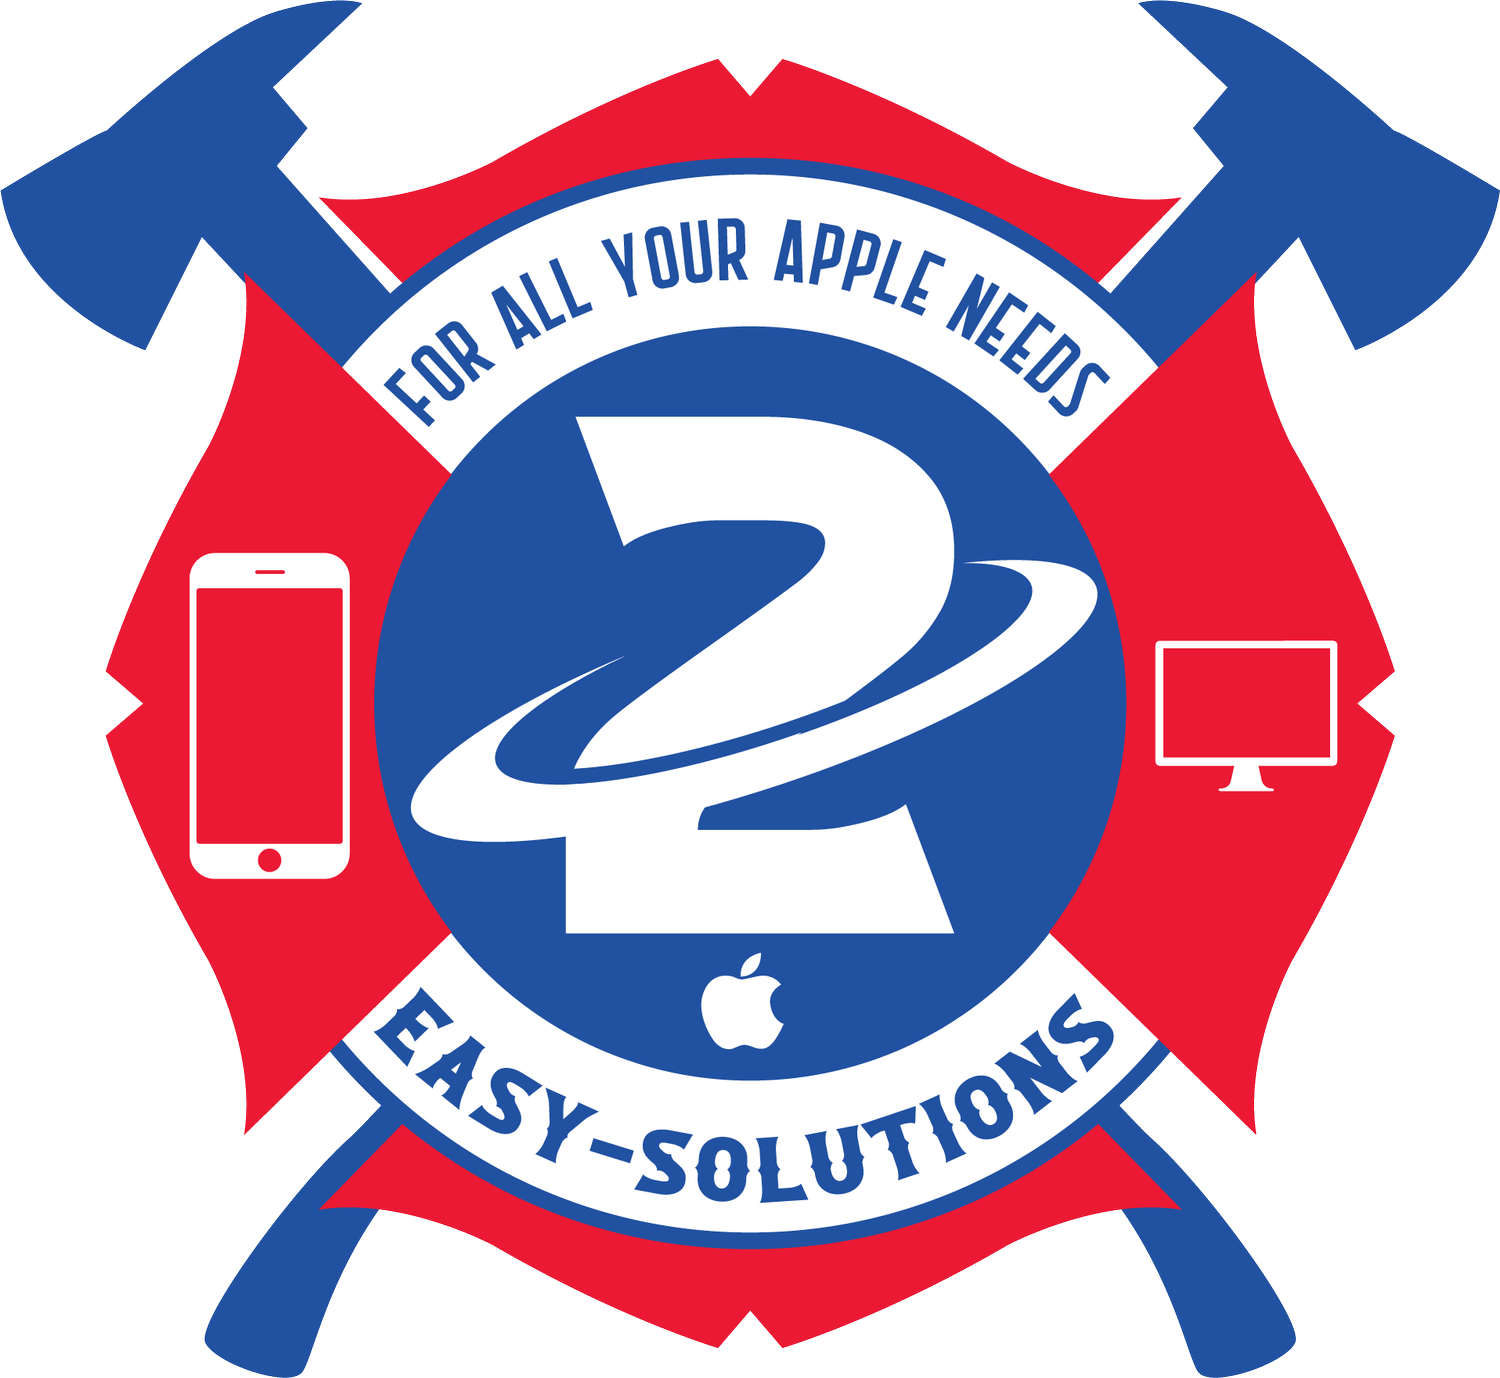 2 Easy-Solutions